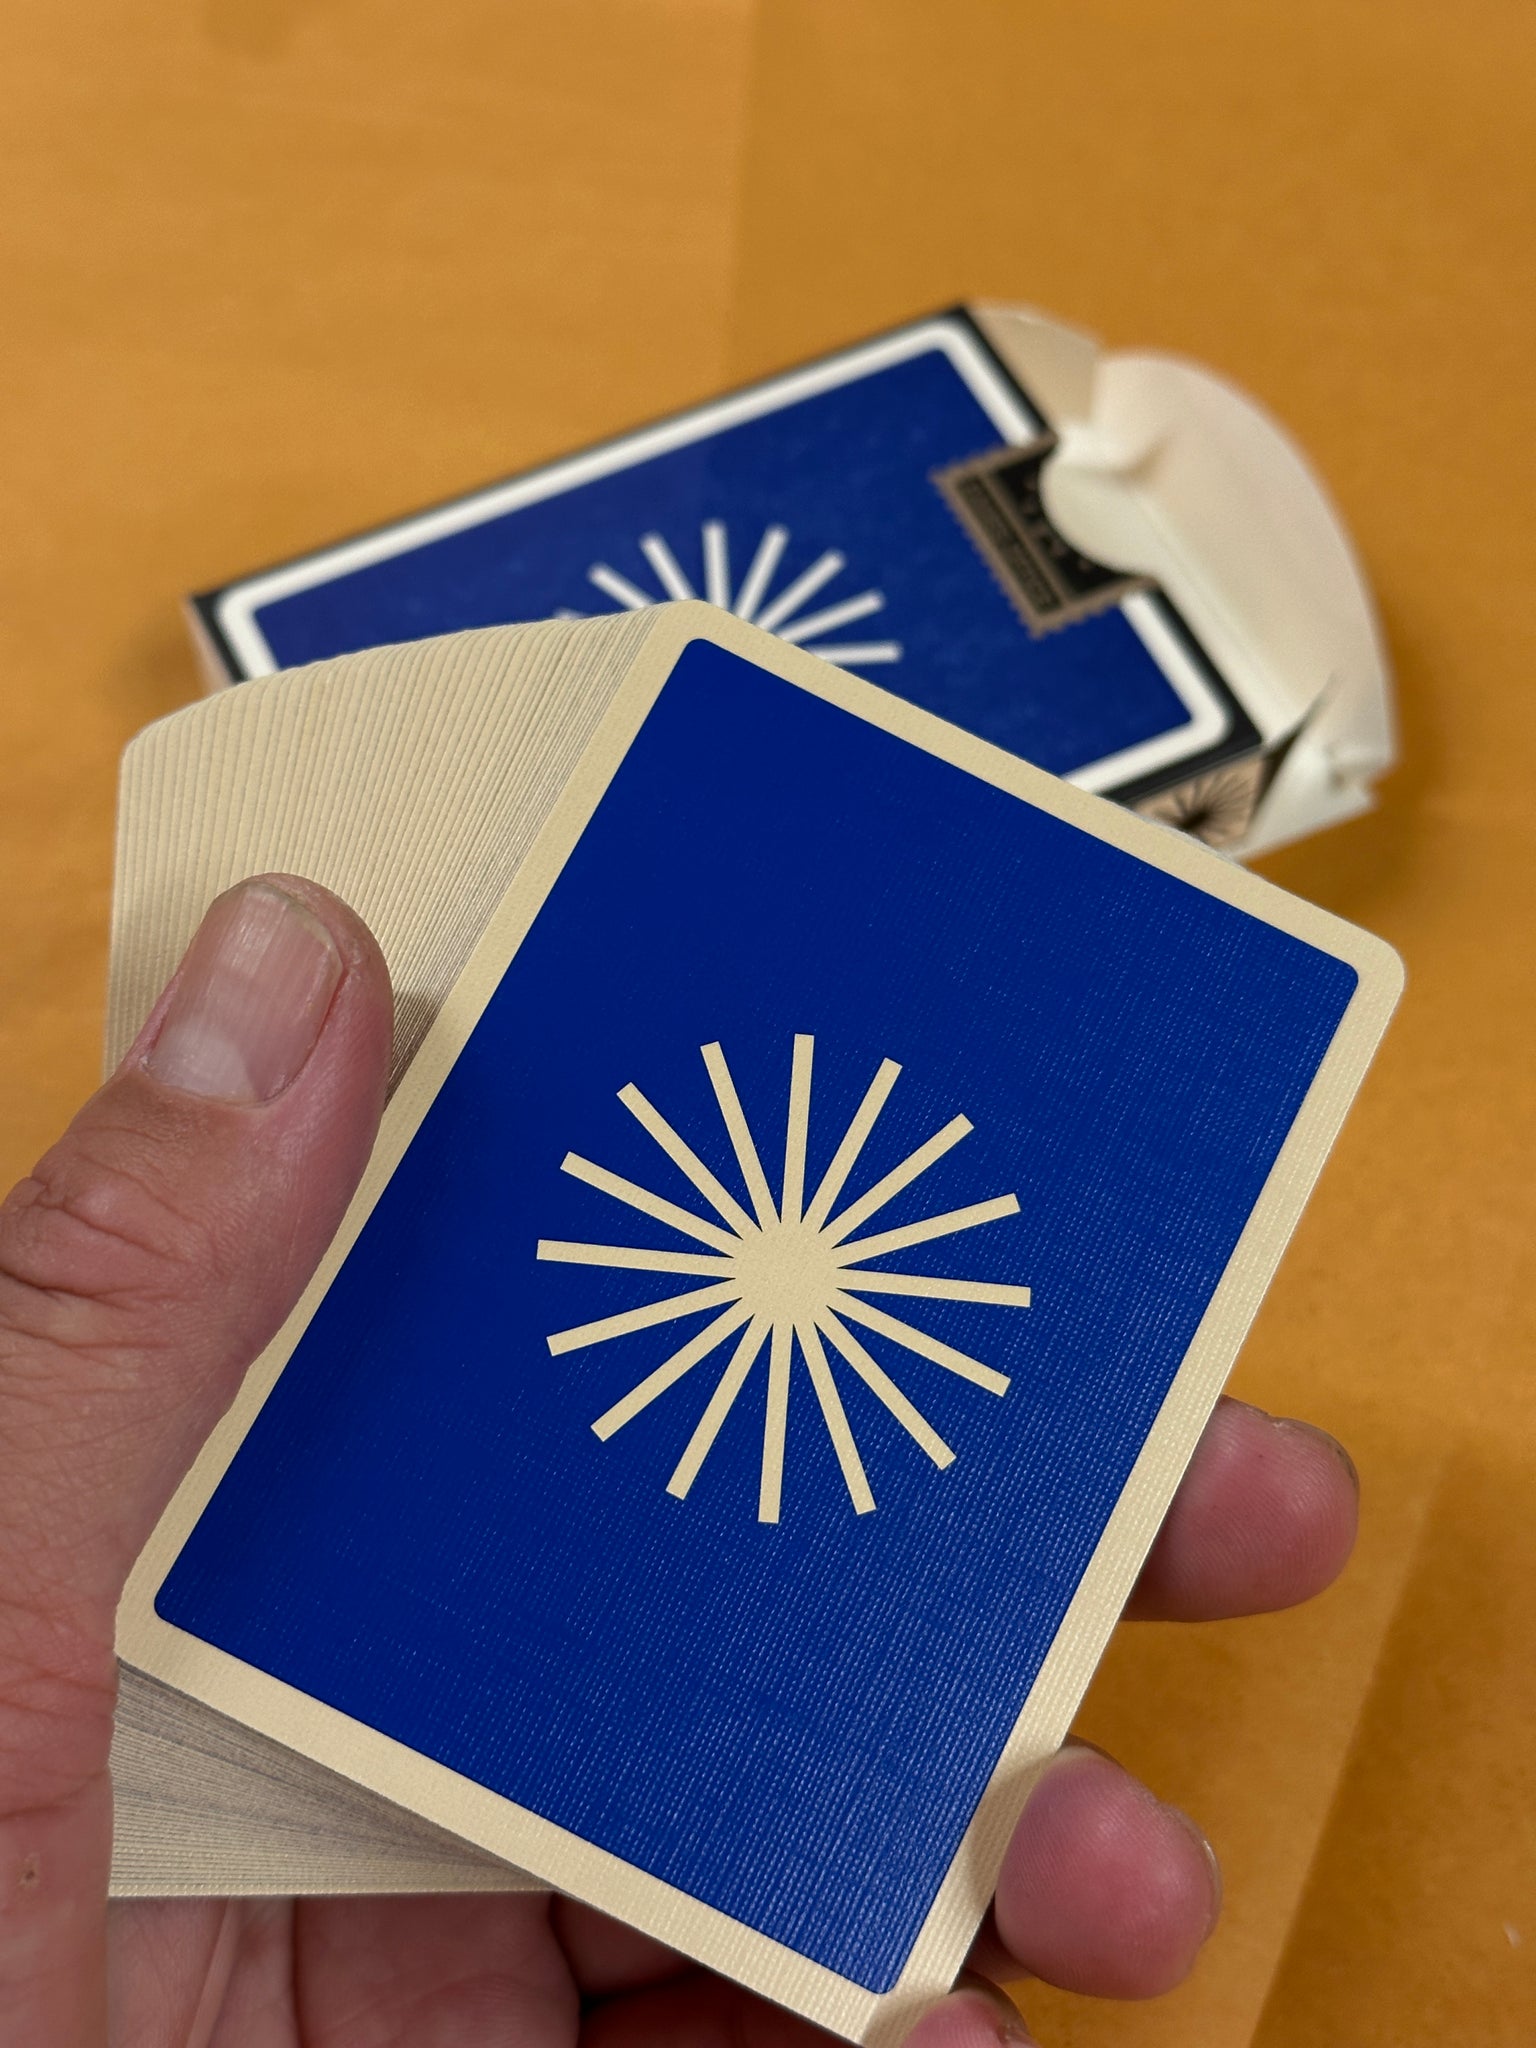 Art of Play - Eames "Starburst" Playing Cards